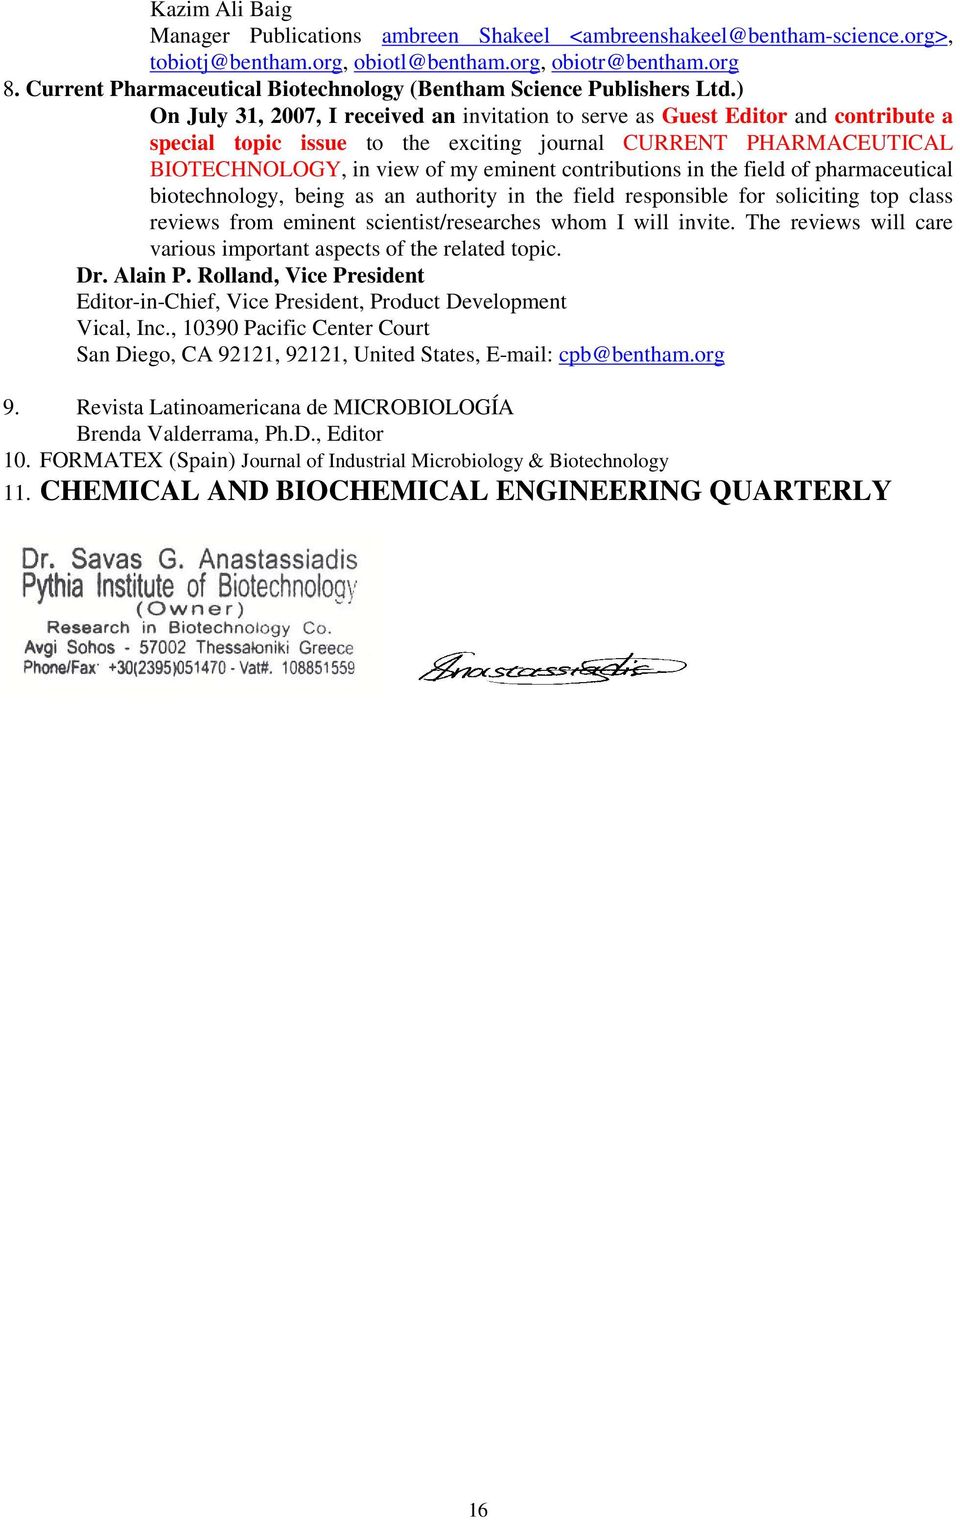 ) On July 31, 2007, I received an invitation to serve as Guest Editor and contribute a special topic issue to the exciting journal CURRENT PHARMACEUTICAL BIOTECHNOLOGY, in view of my eminent